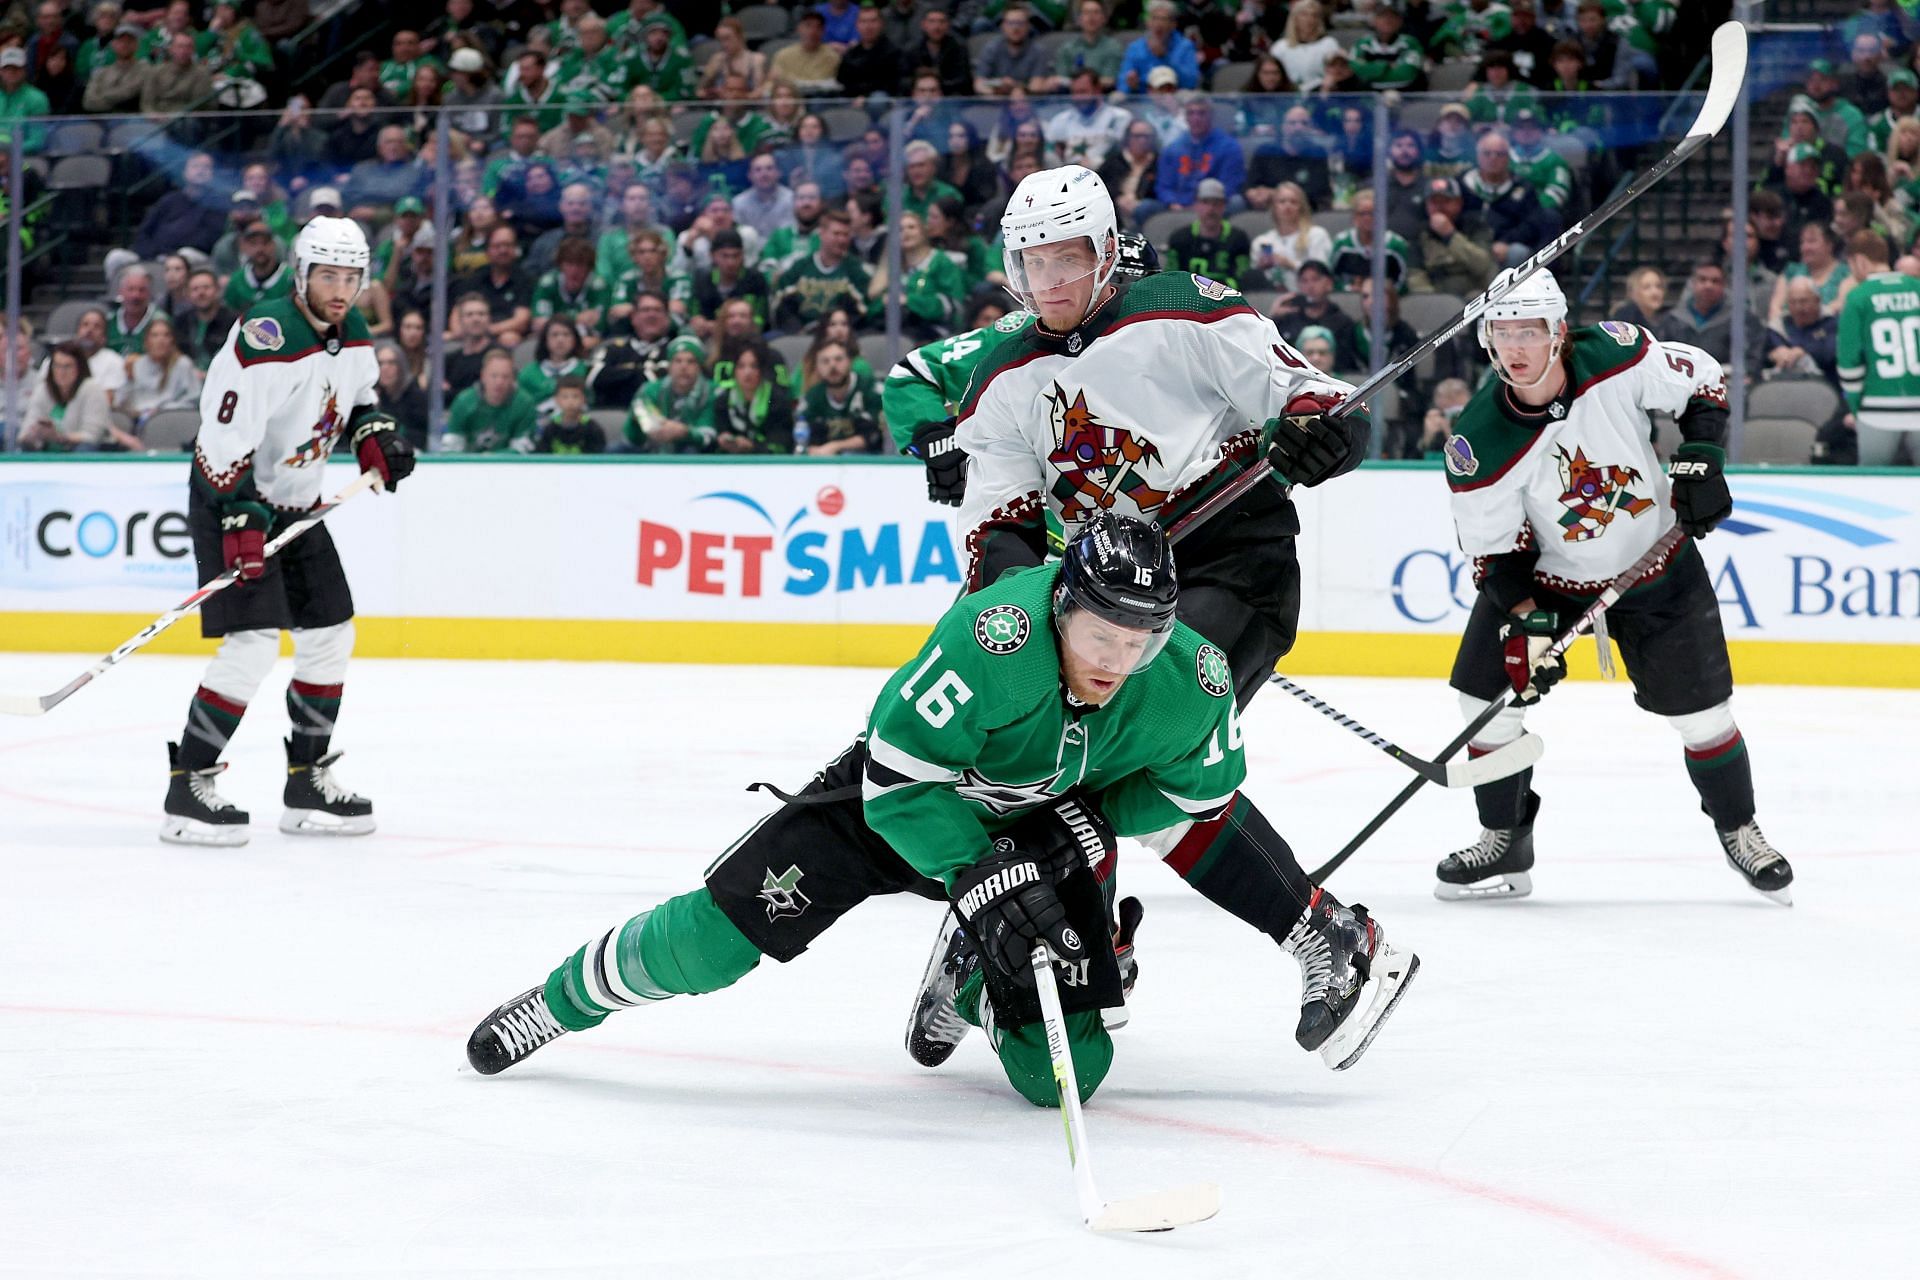 Arizona Coyotes vs Dallas Stars Live streaming options, how and where to watch NHL live on TV, channel List and more